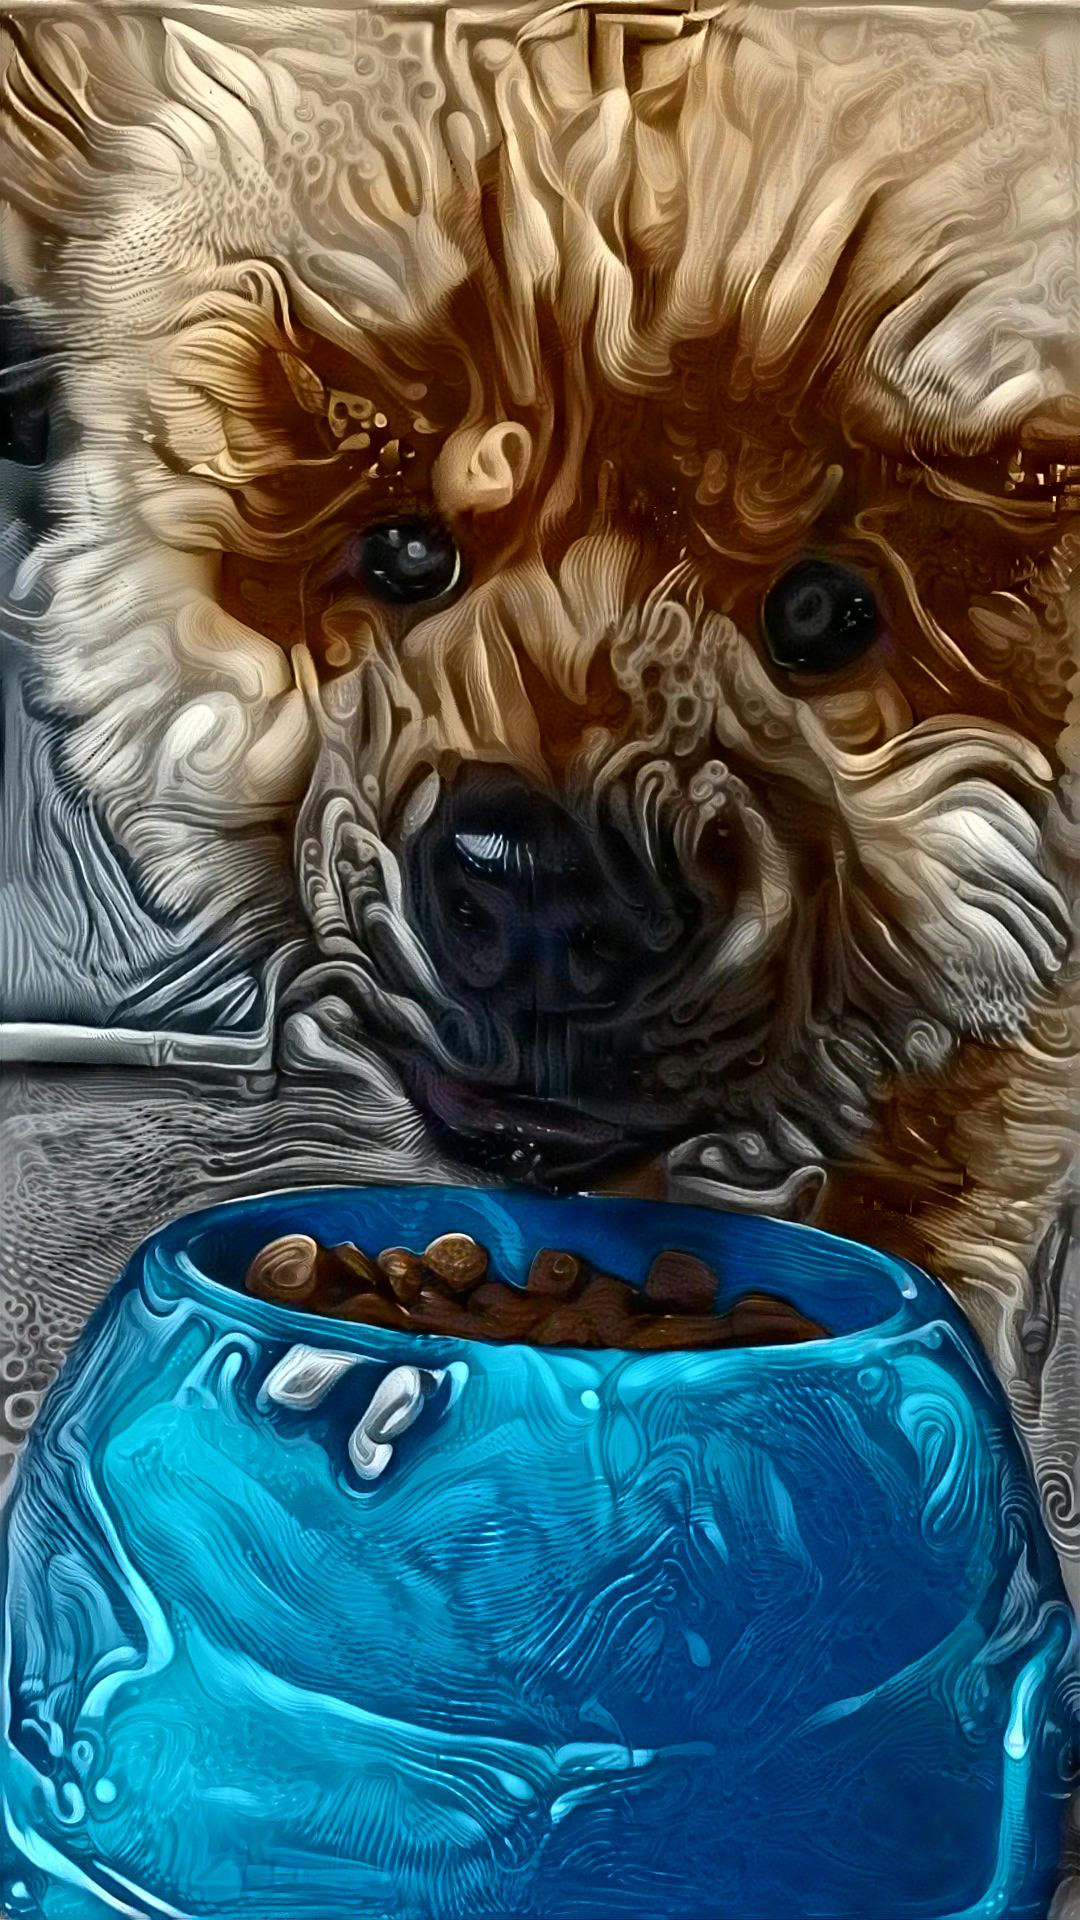 Watching your dog eat (on acid)